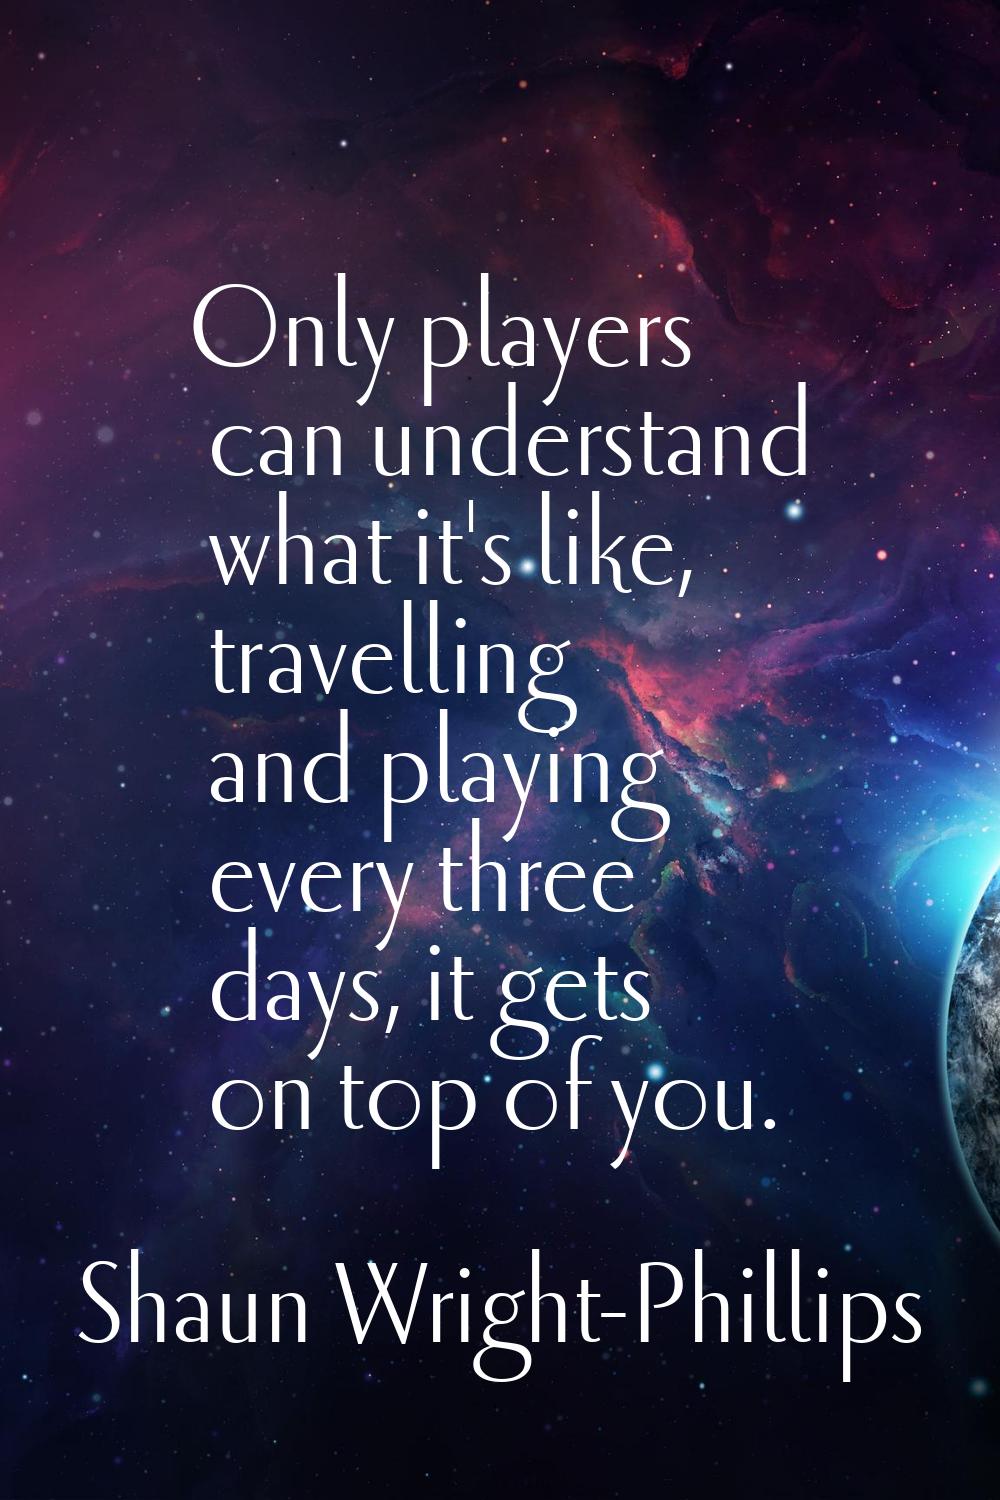 Only players can understand what it's like, travelling and playing every three days, it gets on top